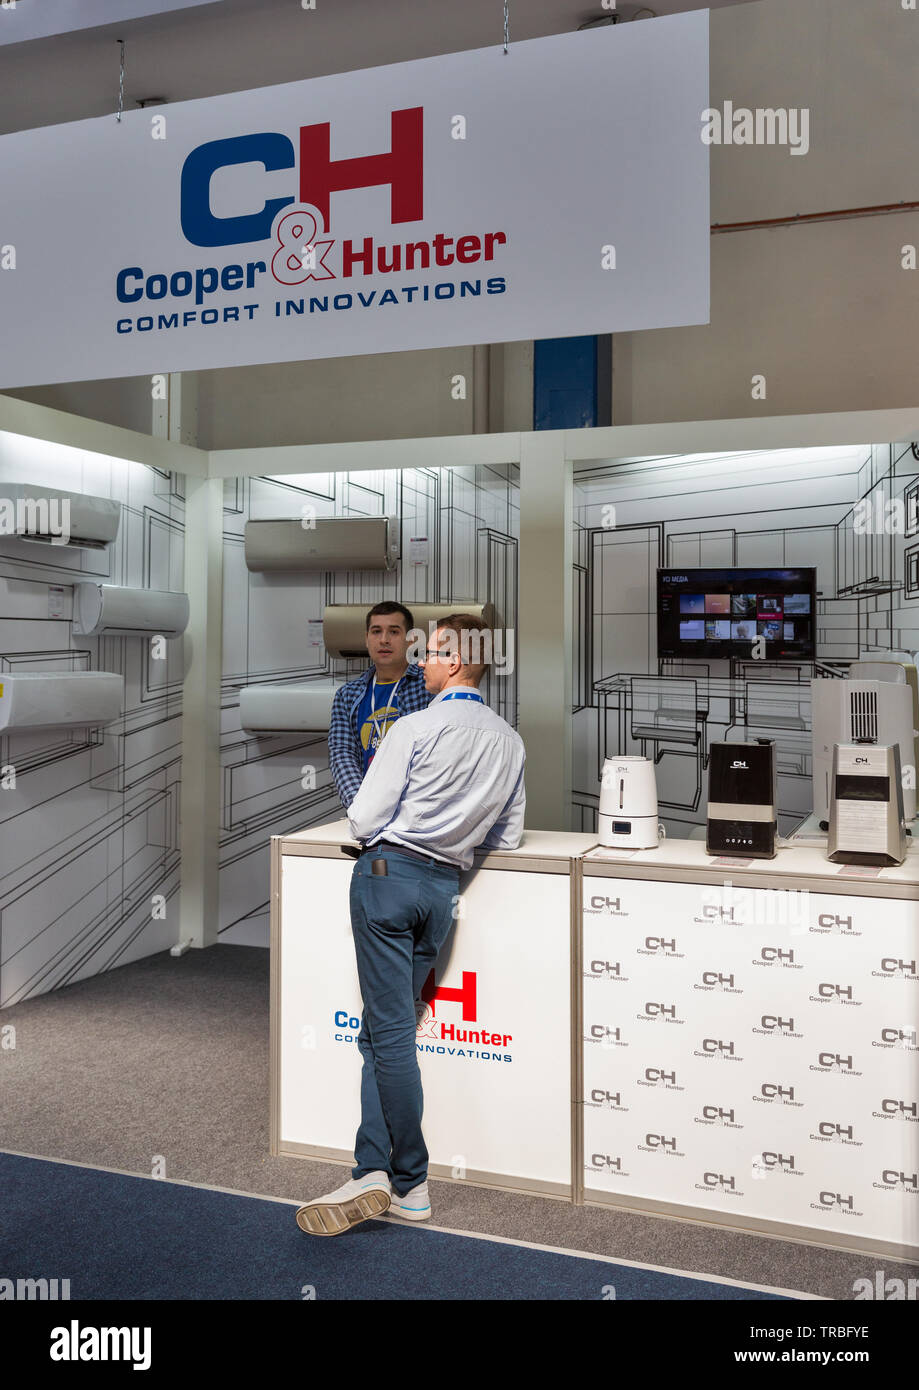 KYIV, UKRAINE - APRIL 06, 2019: People visit Cooper and Hunter air conditioners international company booth during CEE 2019, the largest electronics t Stock Photo